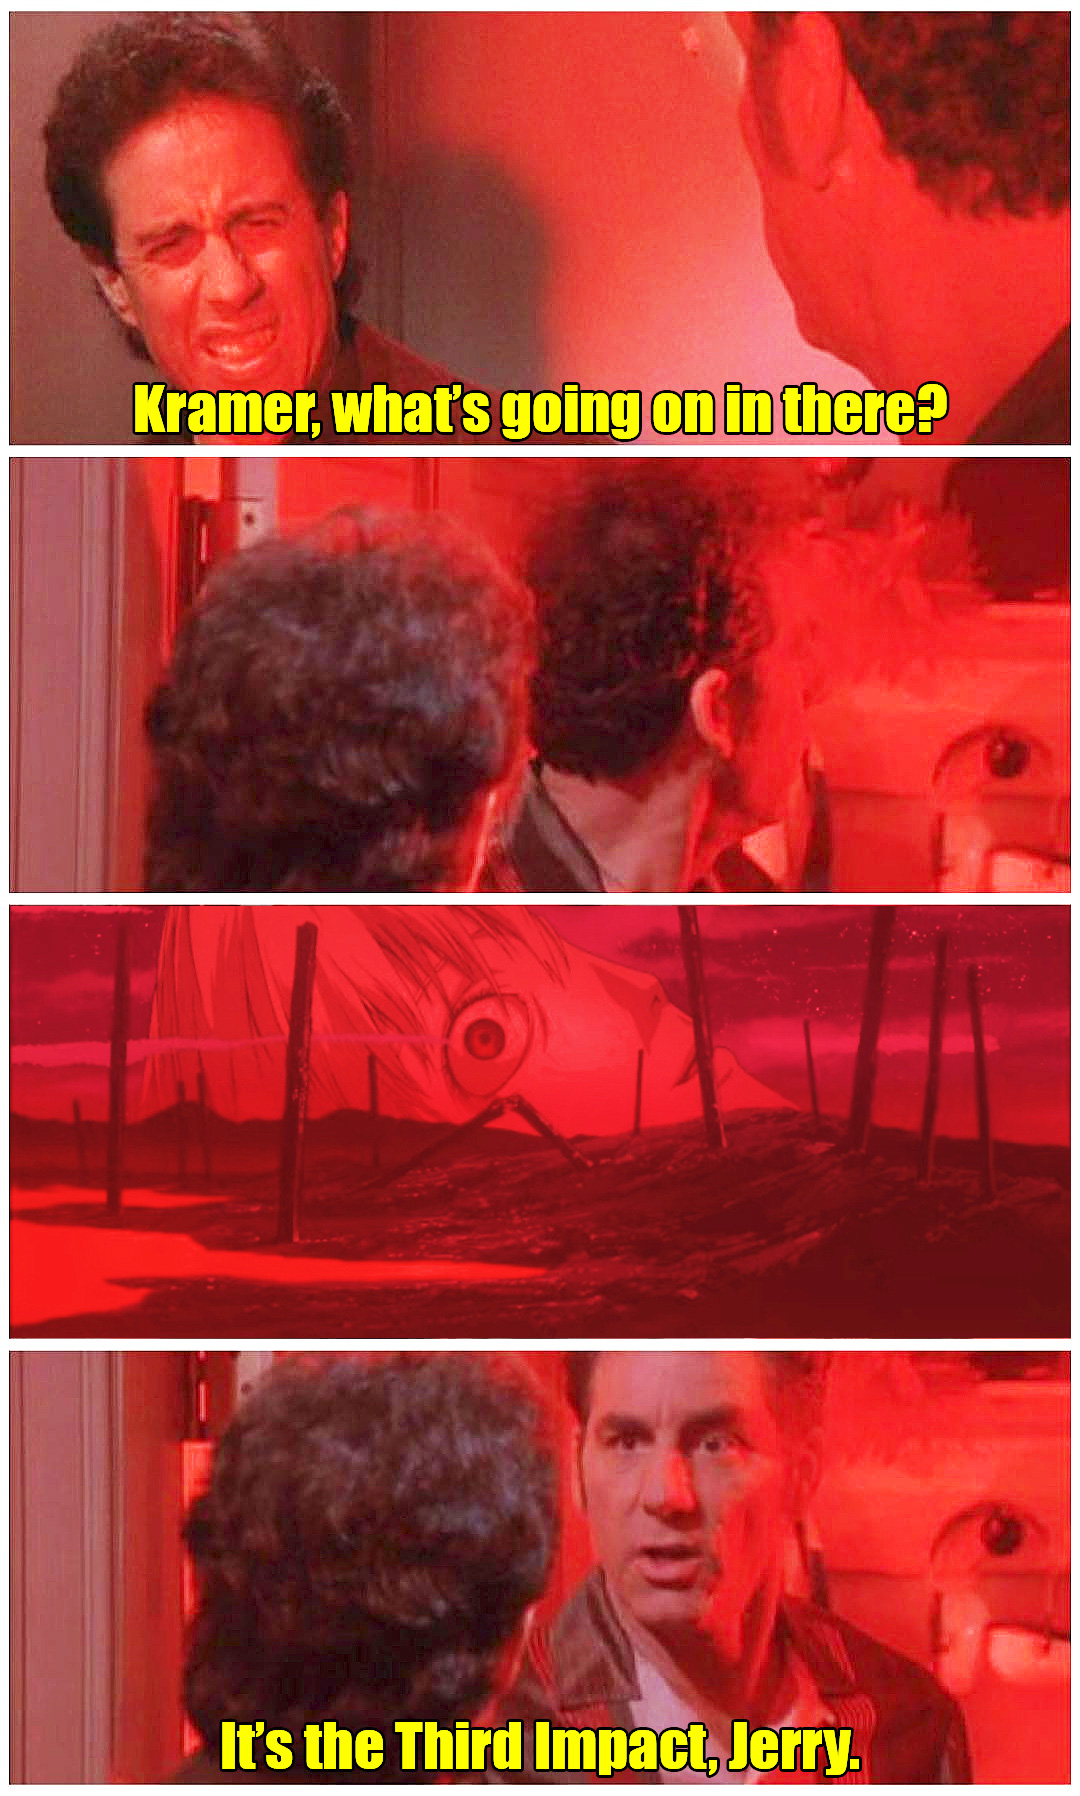 Kramer, what's going on in there?